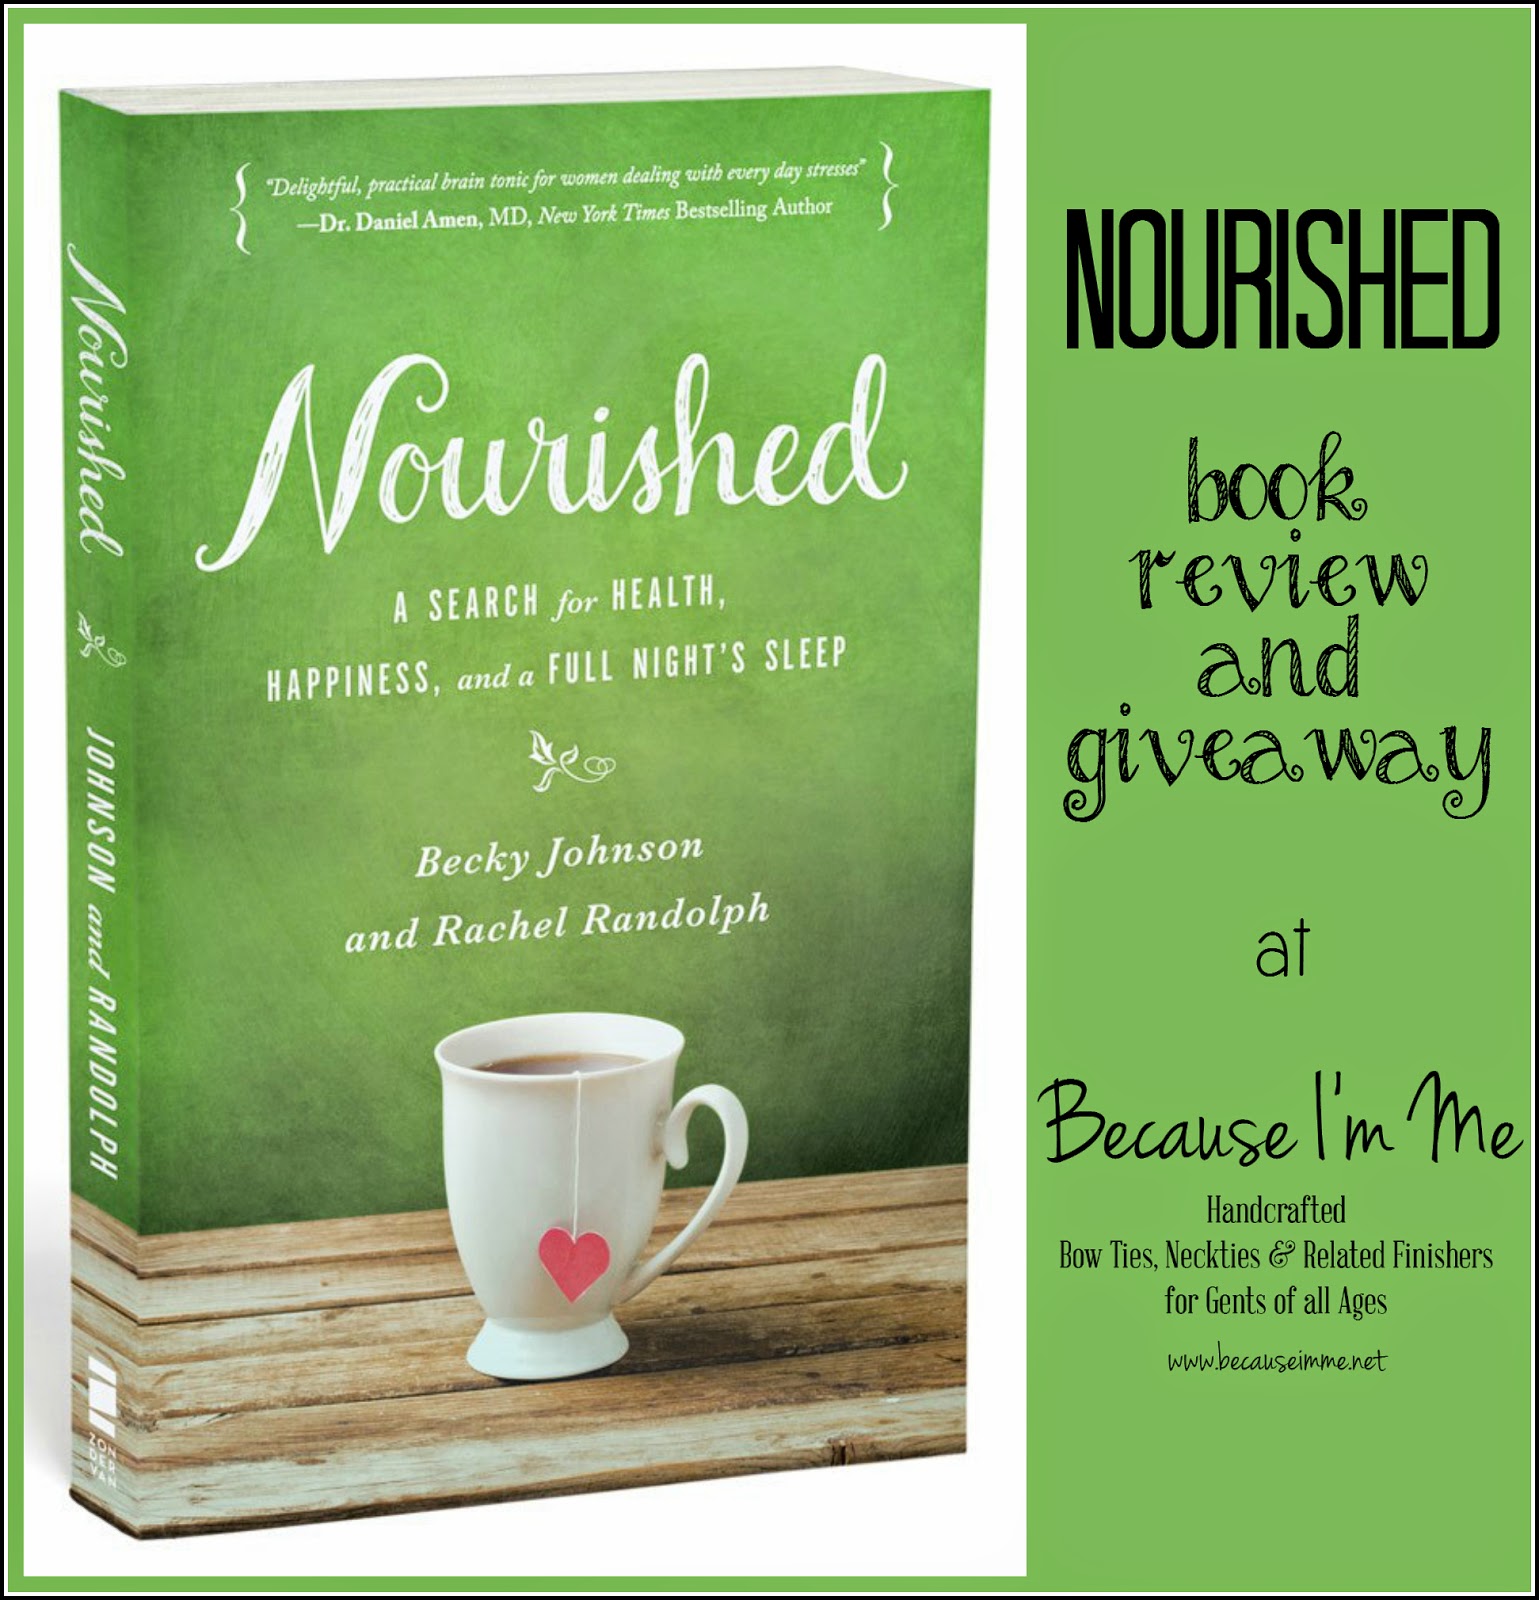 Book review and giveaway; Nourished, a Search for Health, Happines, and a Full Night's Sleep at Because I'm Me